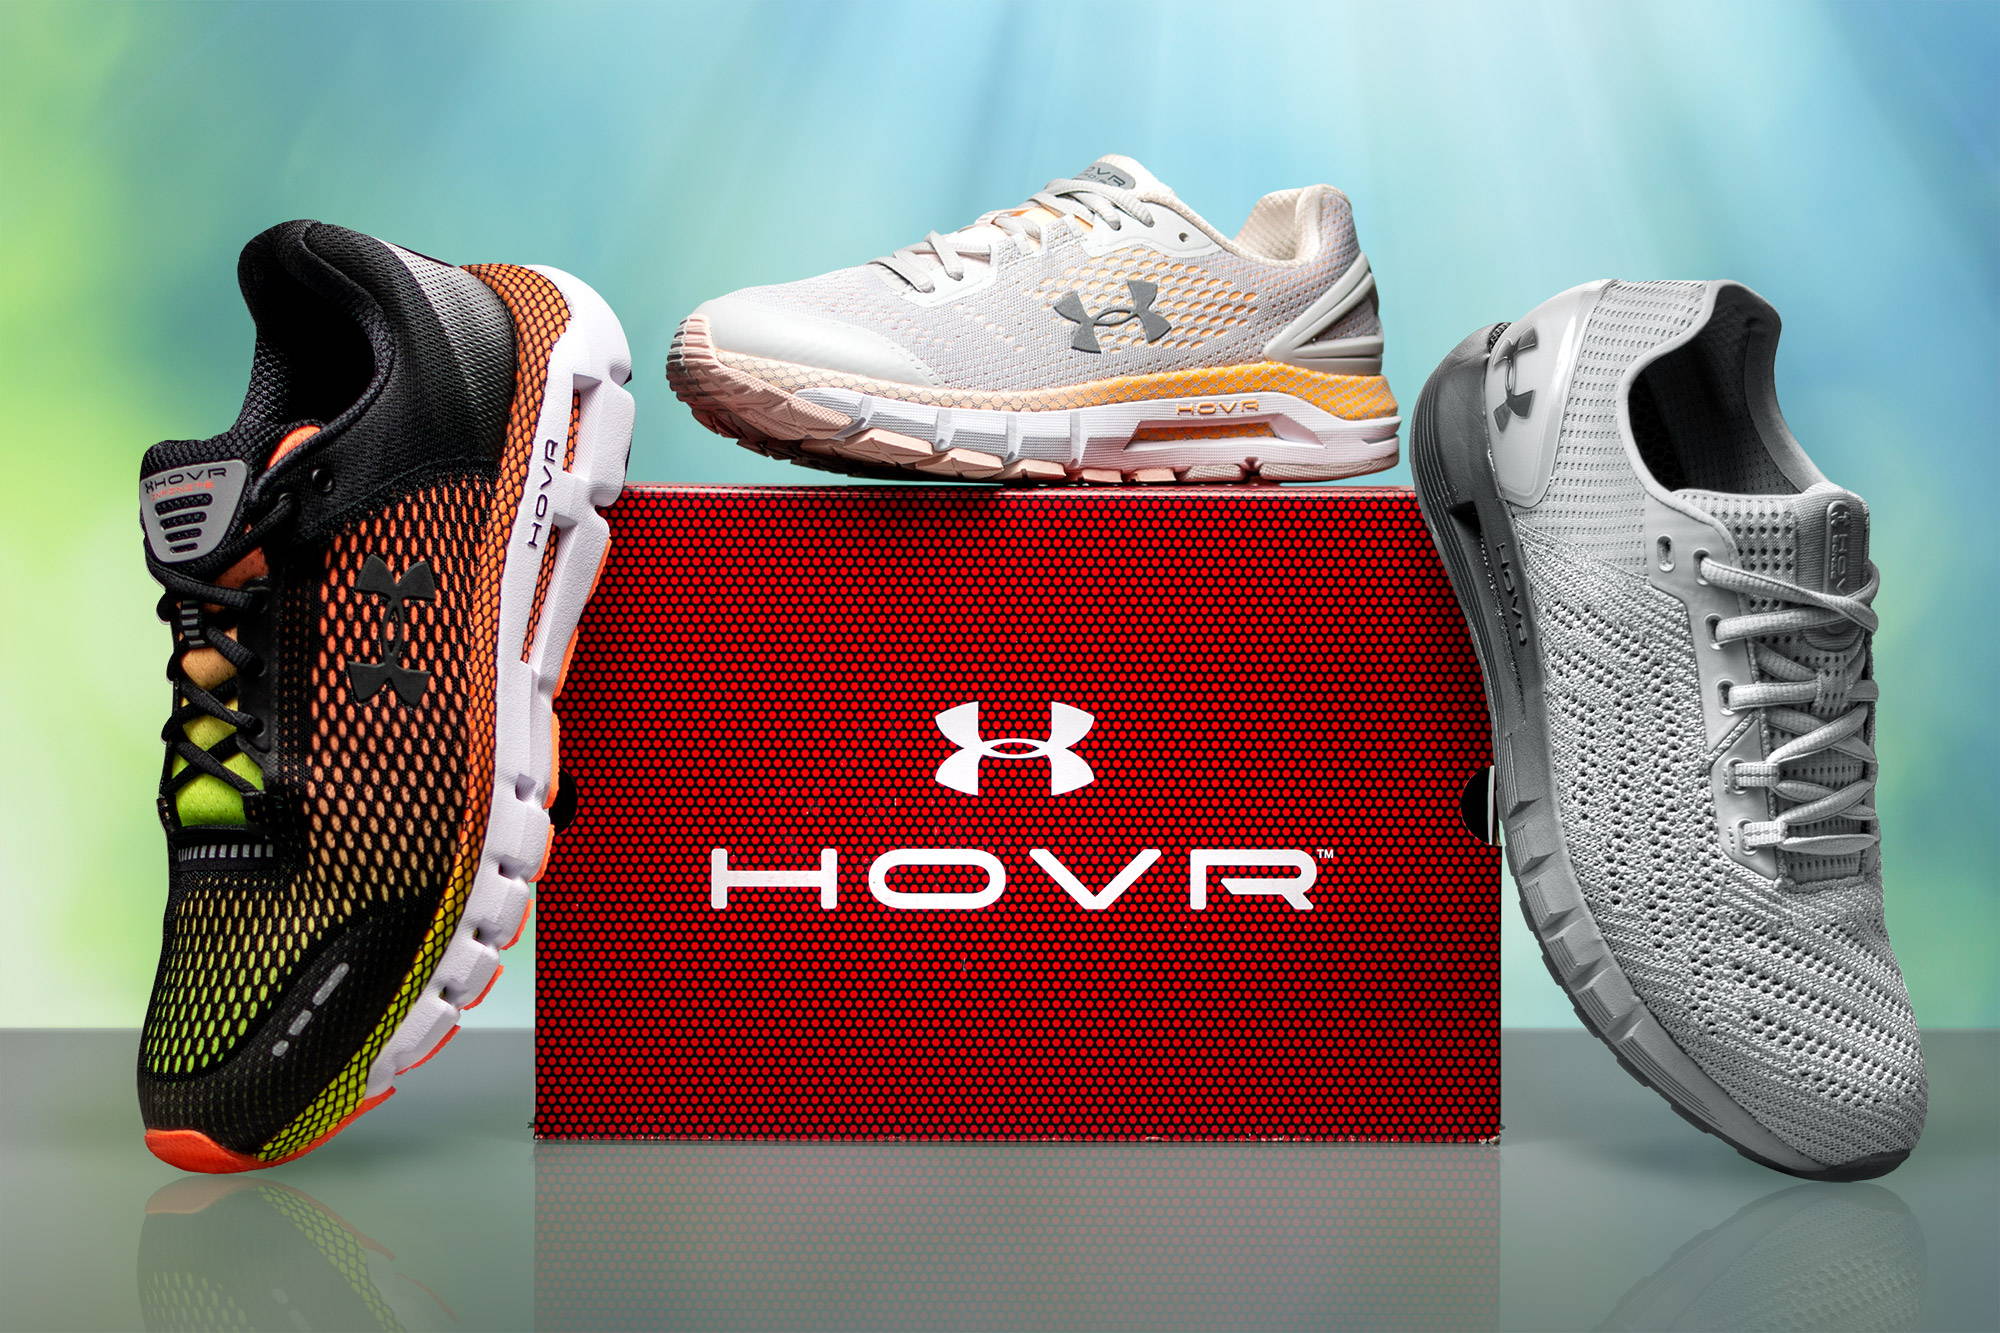 Under Armour HOVR Connected Series Running Shoes Let You Leave Your Phone at Home